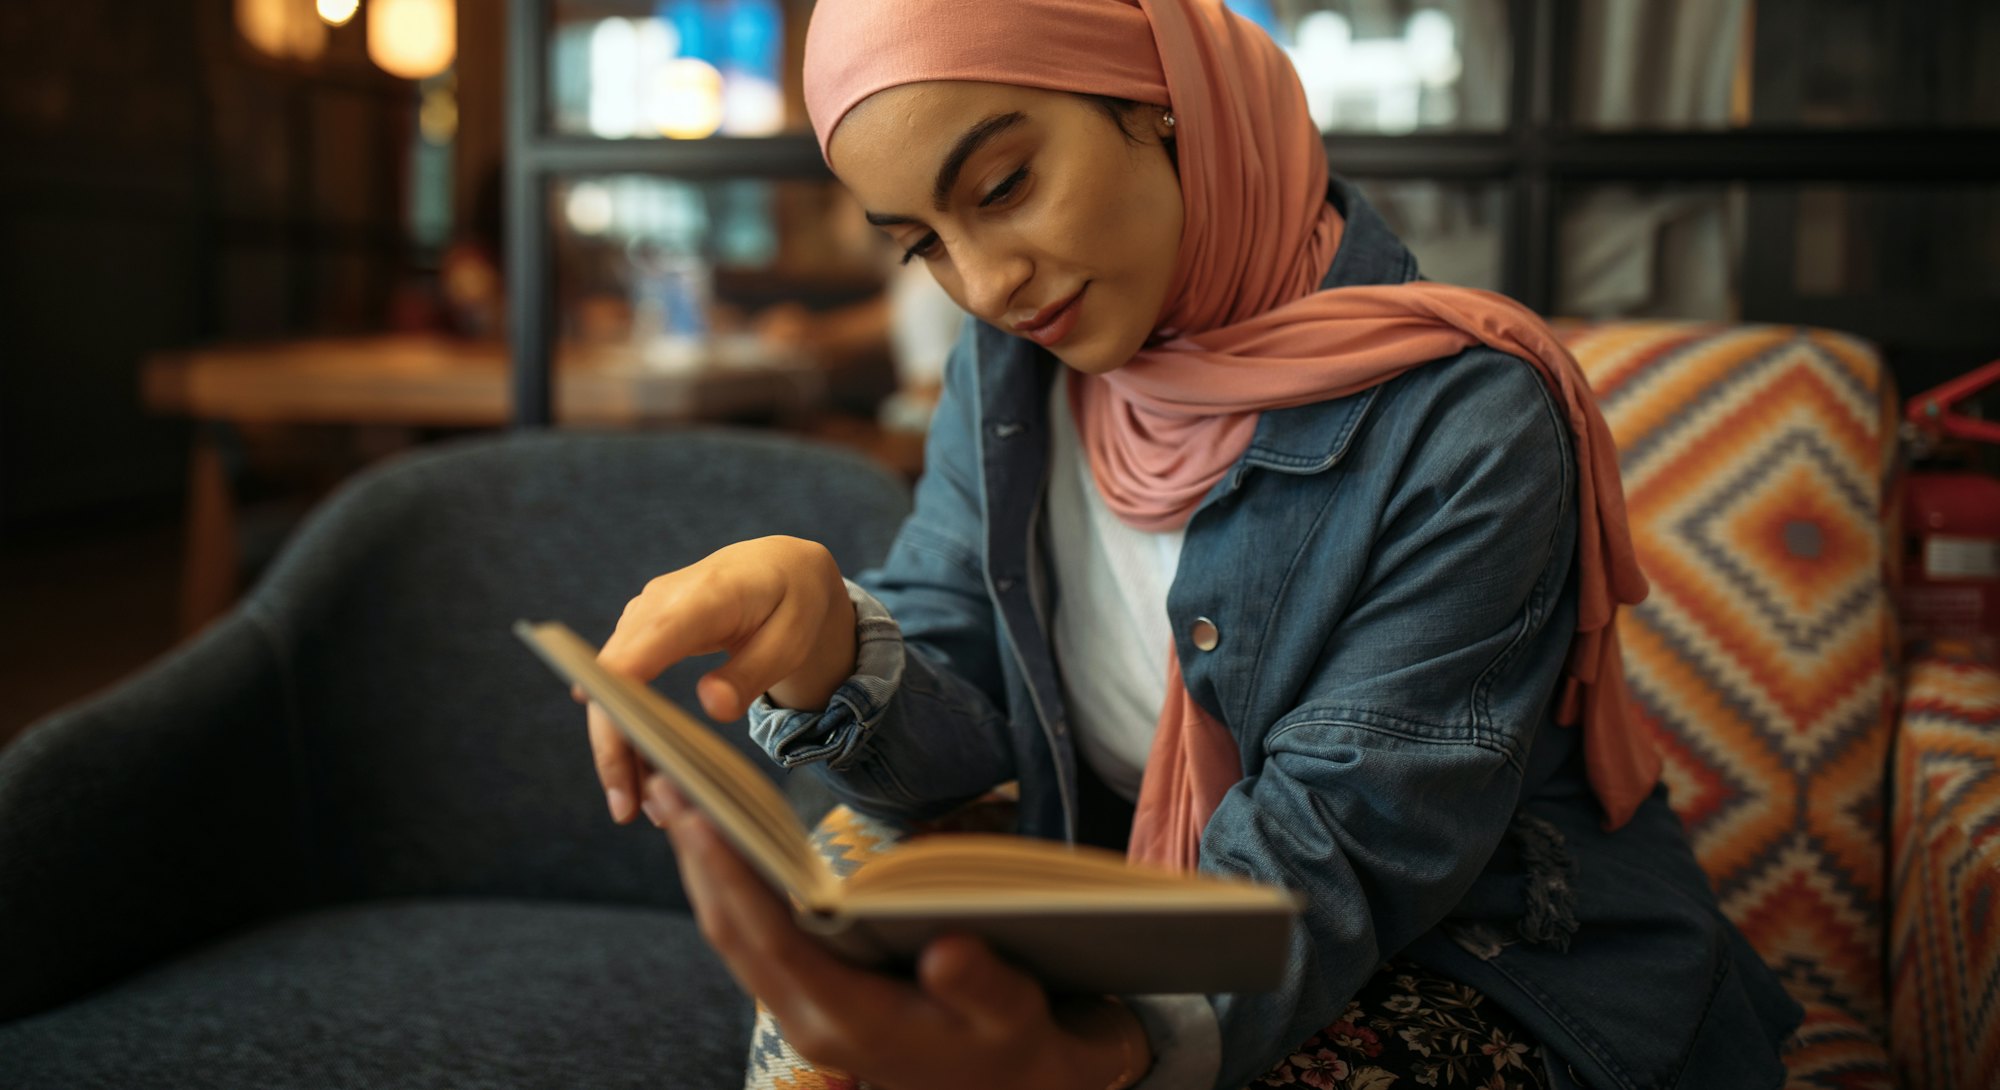 Young muslim woman in hijab reading book at cafe